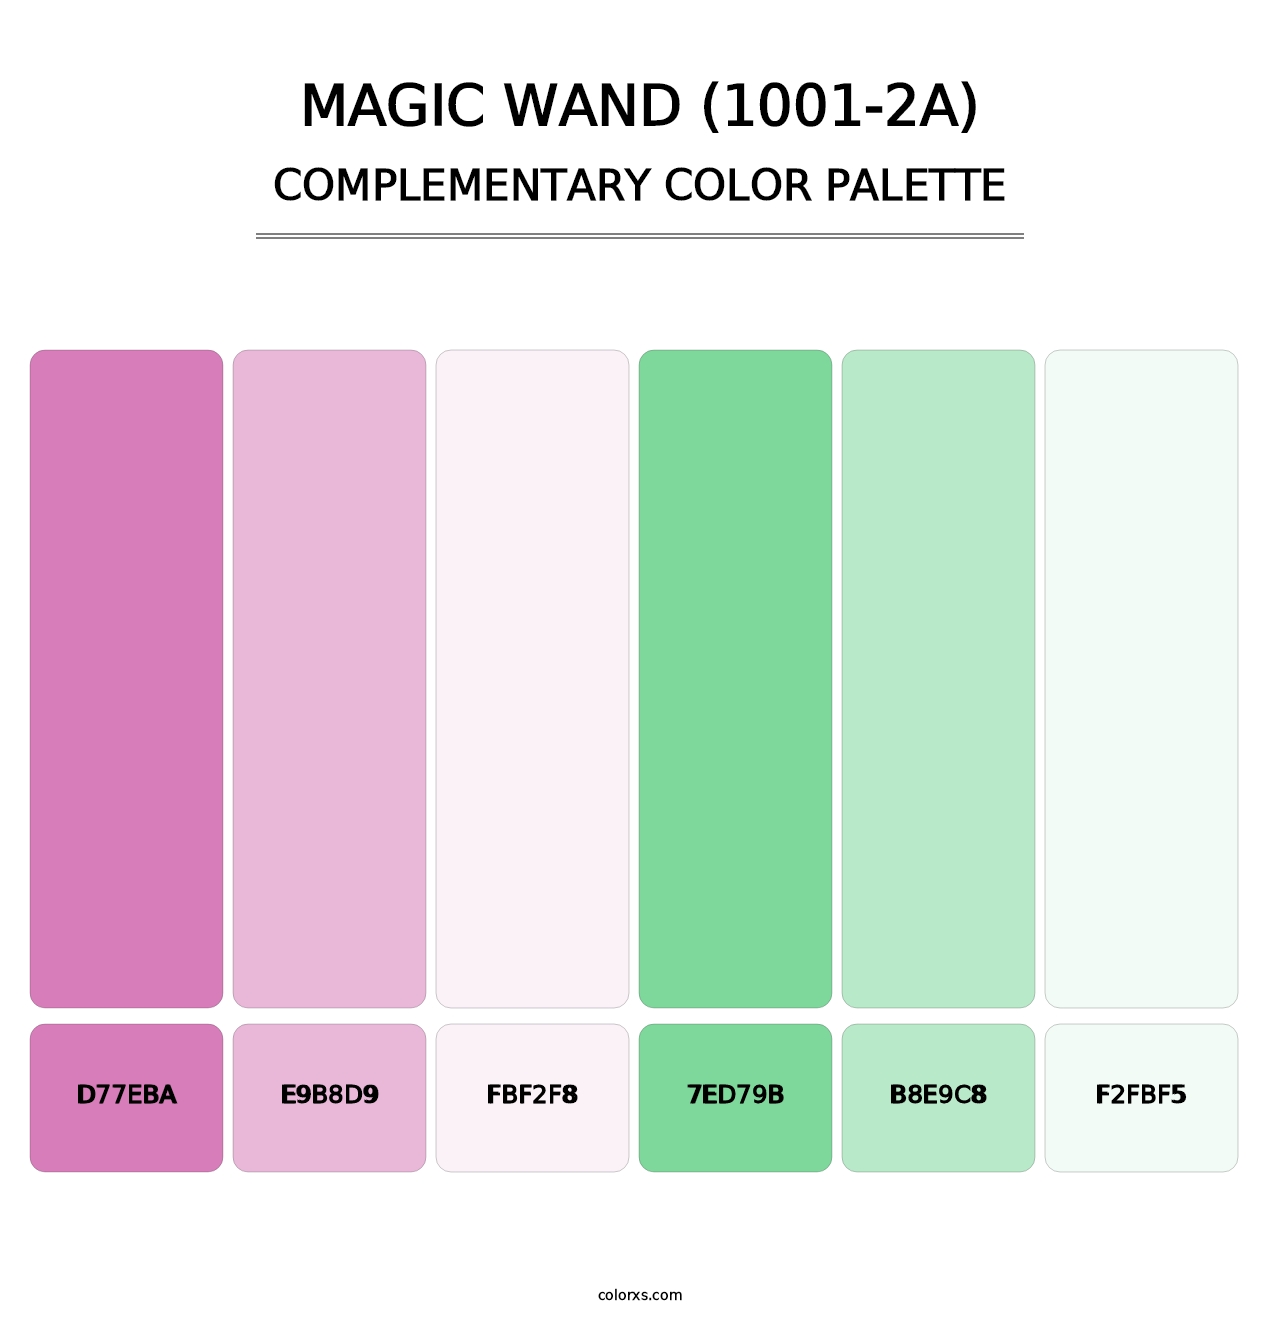 Magic Wand (1001-2A) - Complementary Color Palette